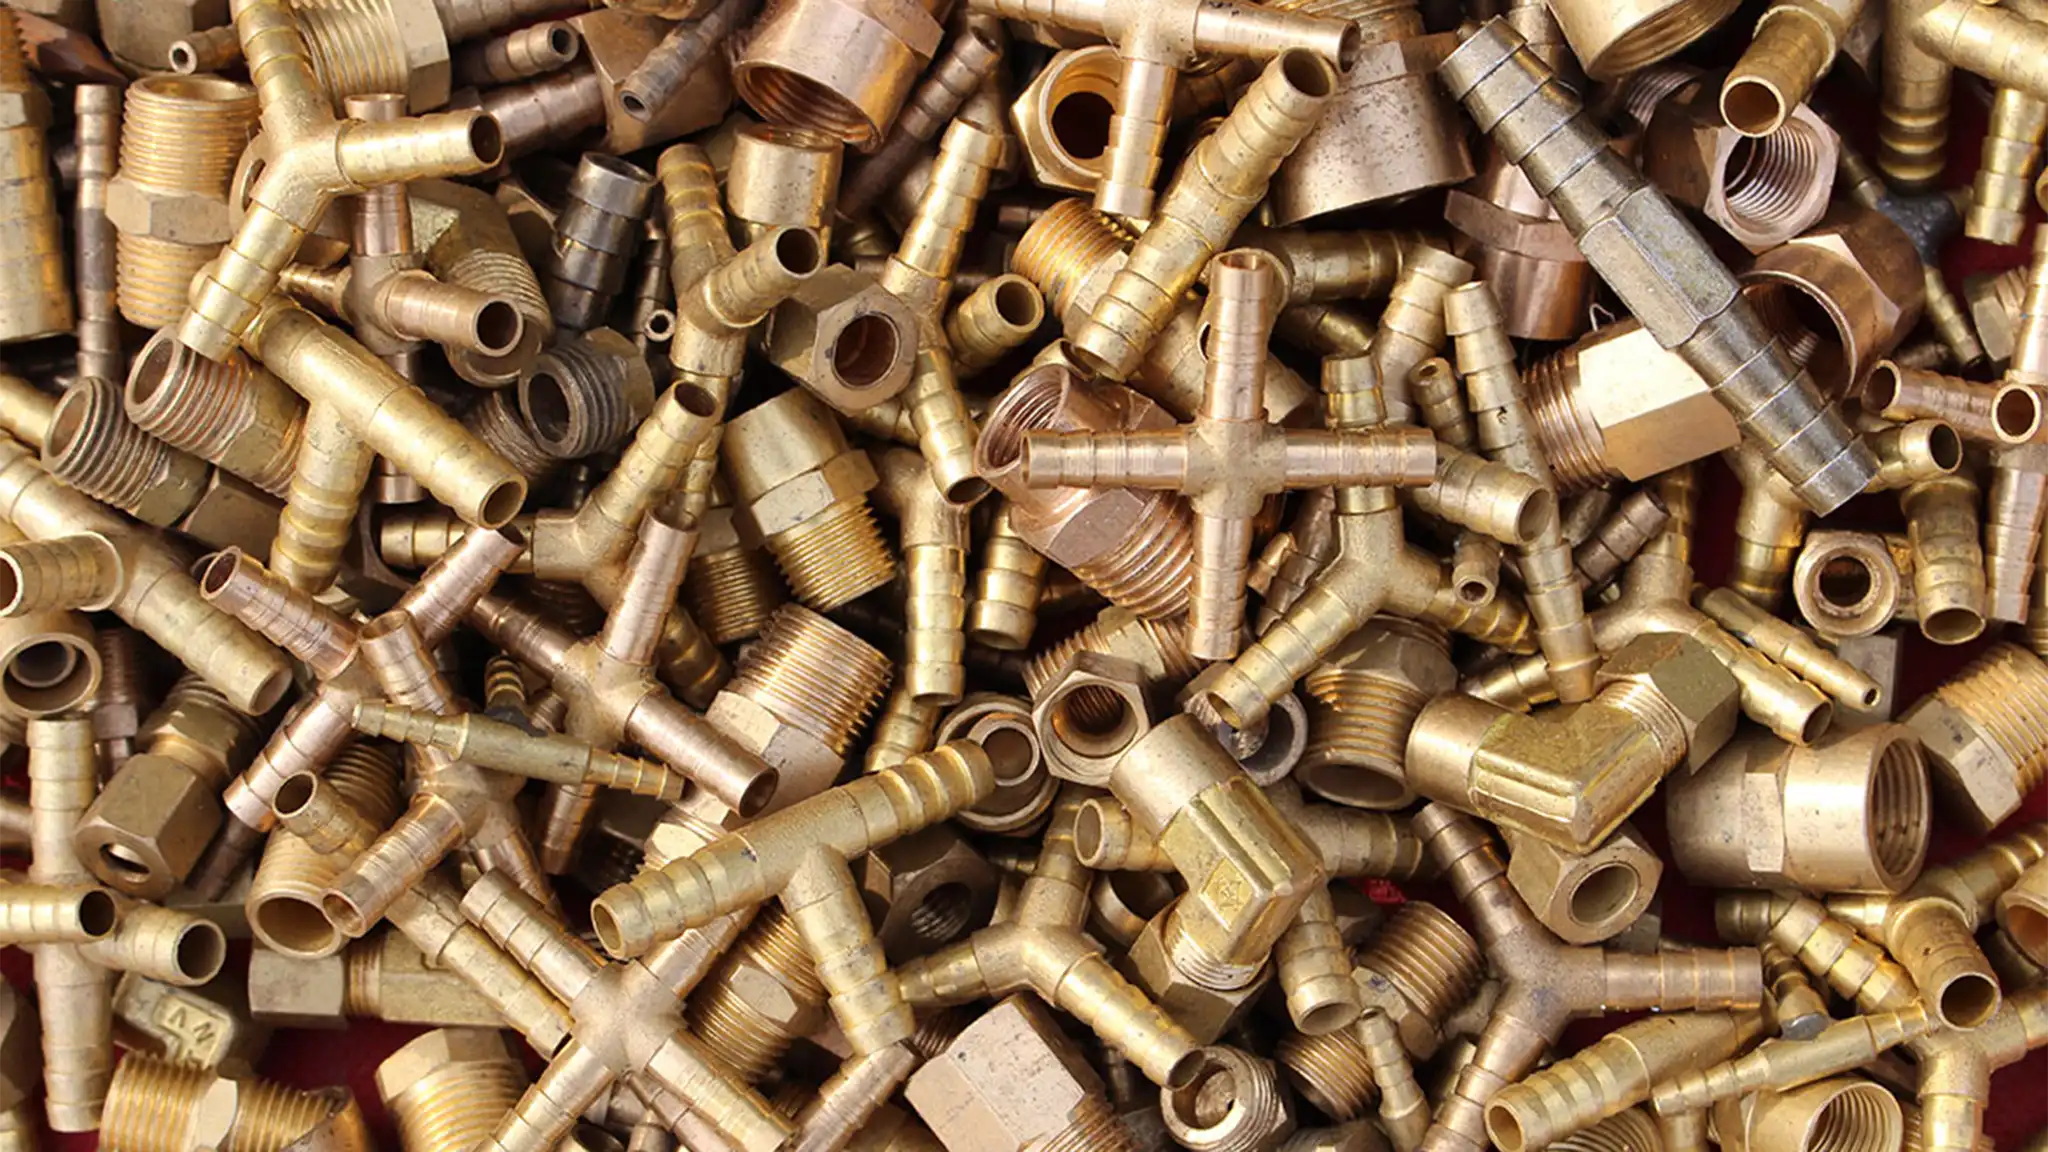 NST Hitech Recycling - Yellow Brass Clean Honey Scrap Services, Yellow Brass  Clean Honey Scrap Services in Chennai, Yellow Brass Clean Honey Scrap  Services in India, Yellow Brass Clean Honey Scrap Services